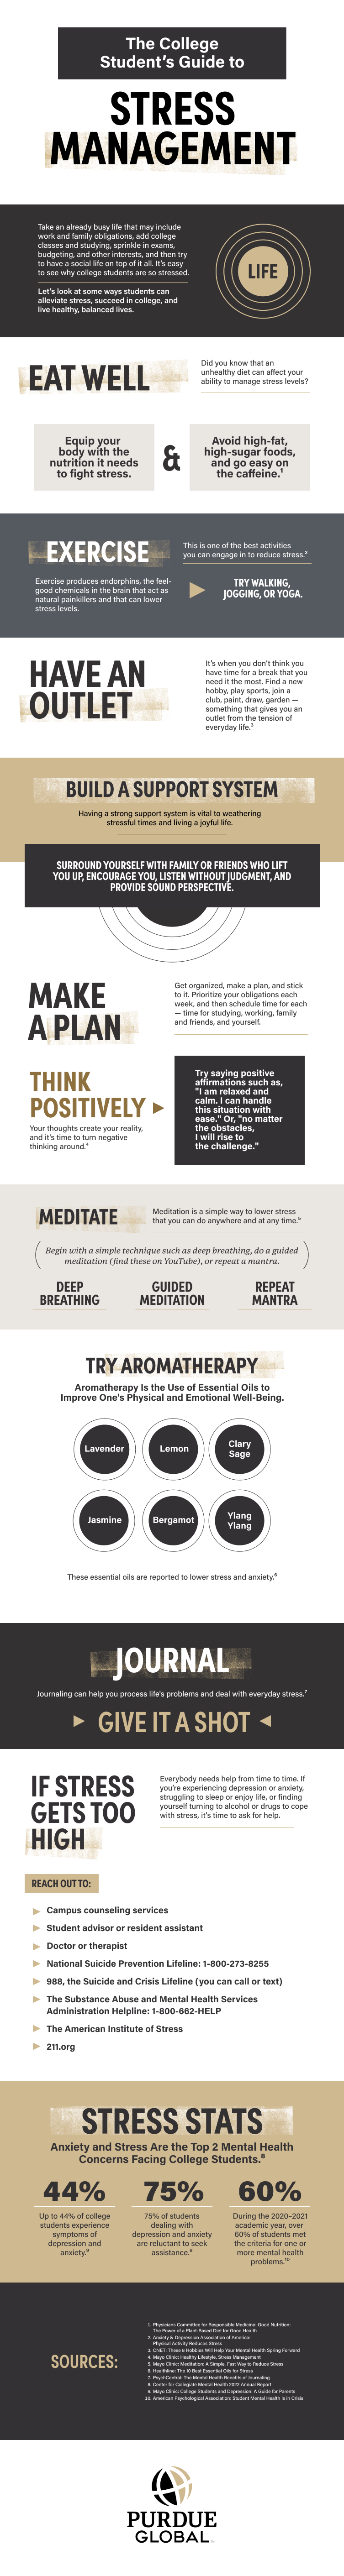 The College Student's Guide to Stress Management Infographic